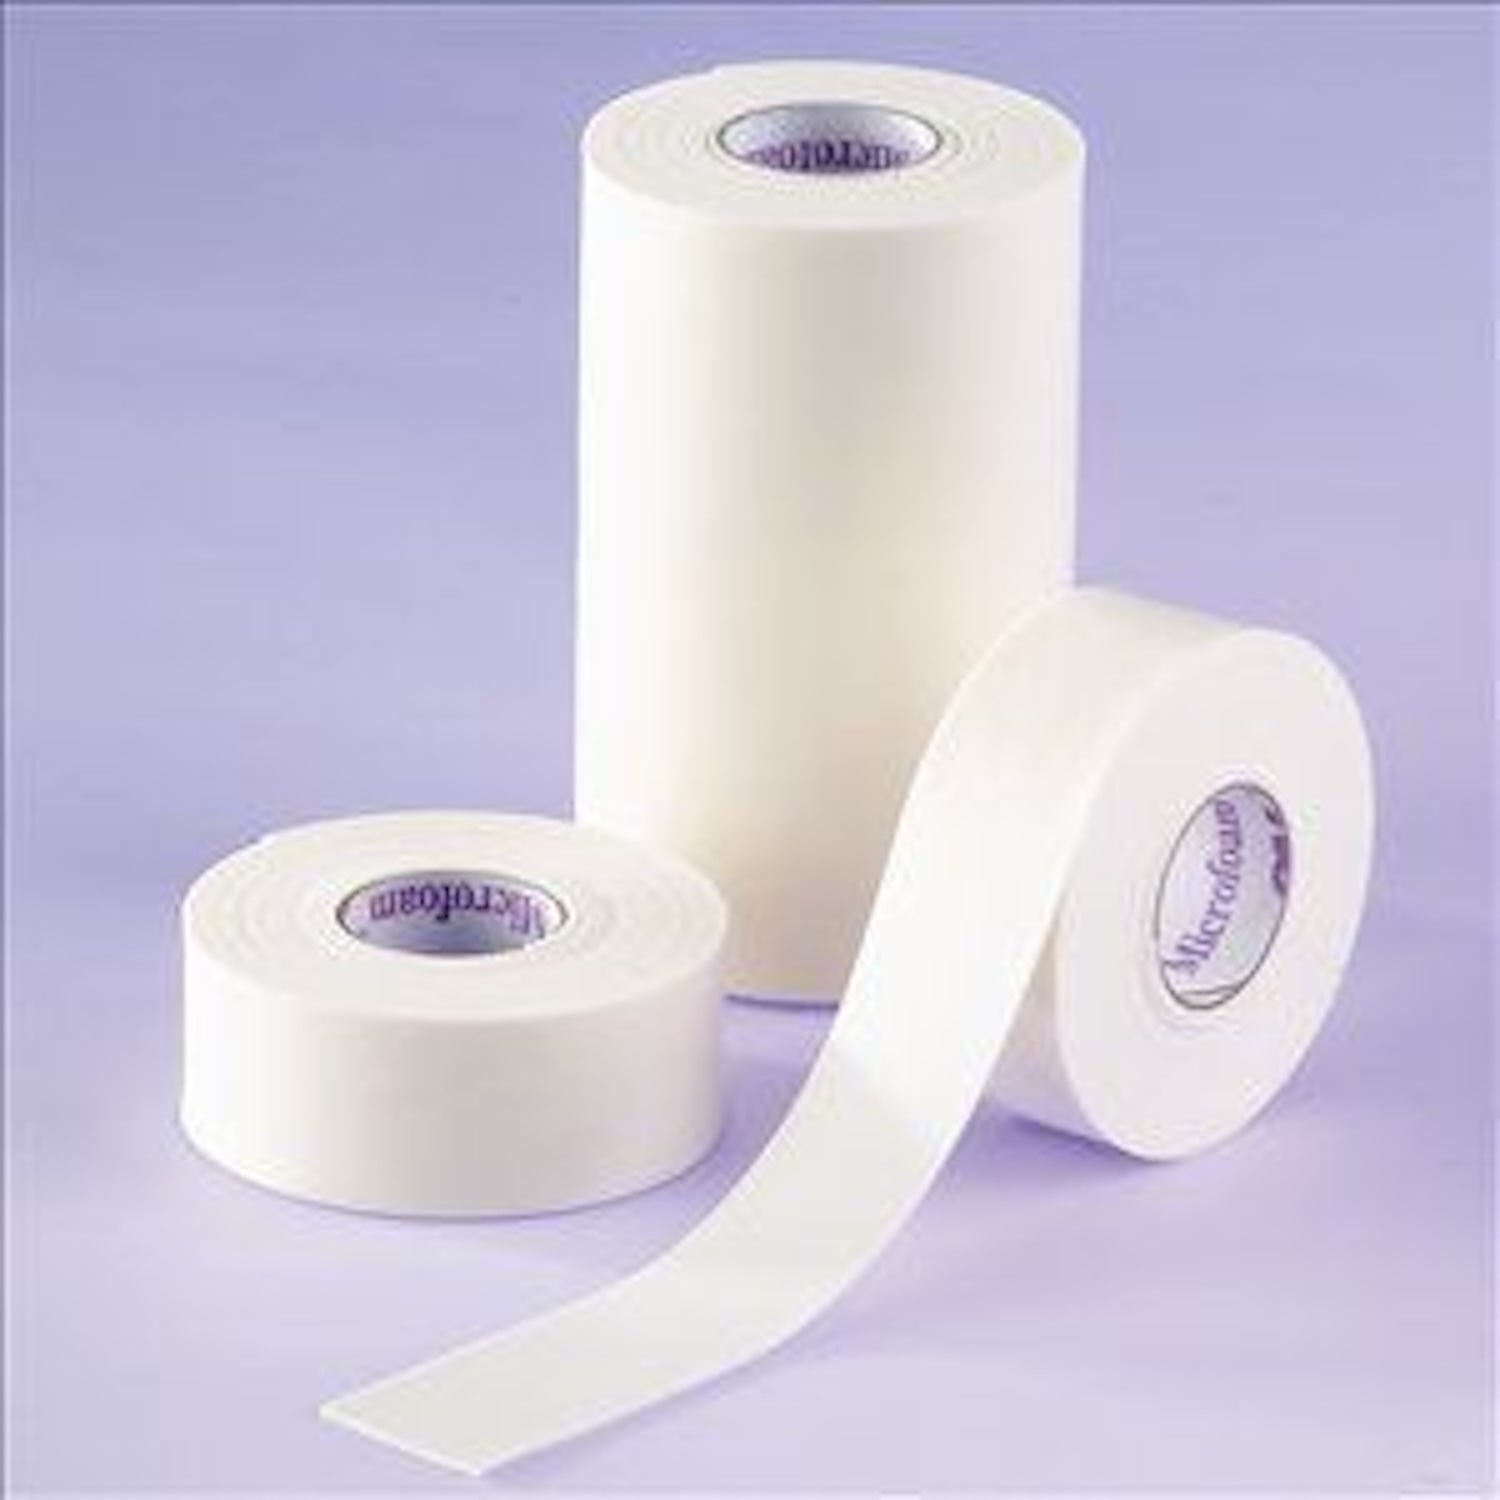 3M Microfoam Surgical Tape | 5cm x 5m | Pack of 6 | Short Expiry Date (2)